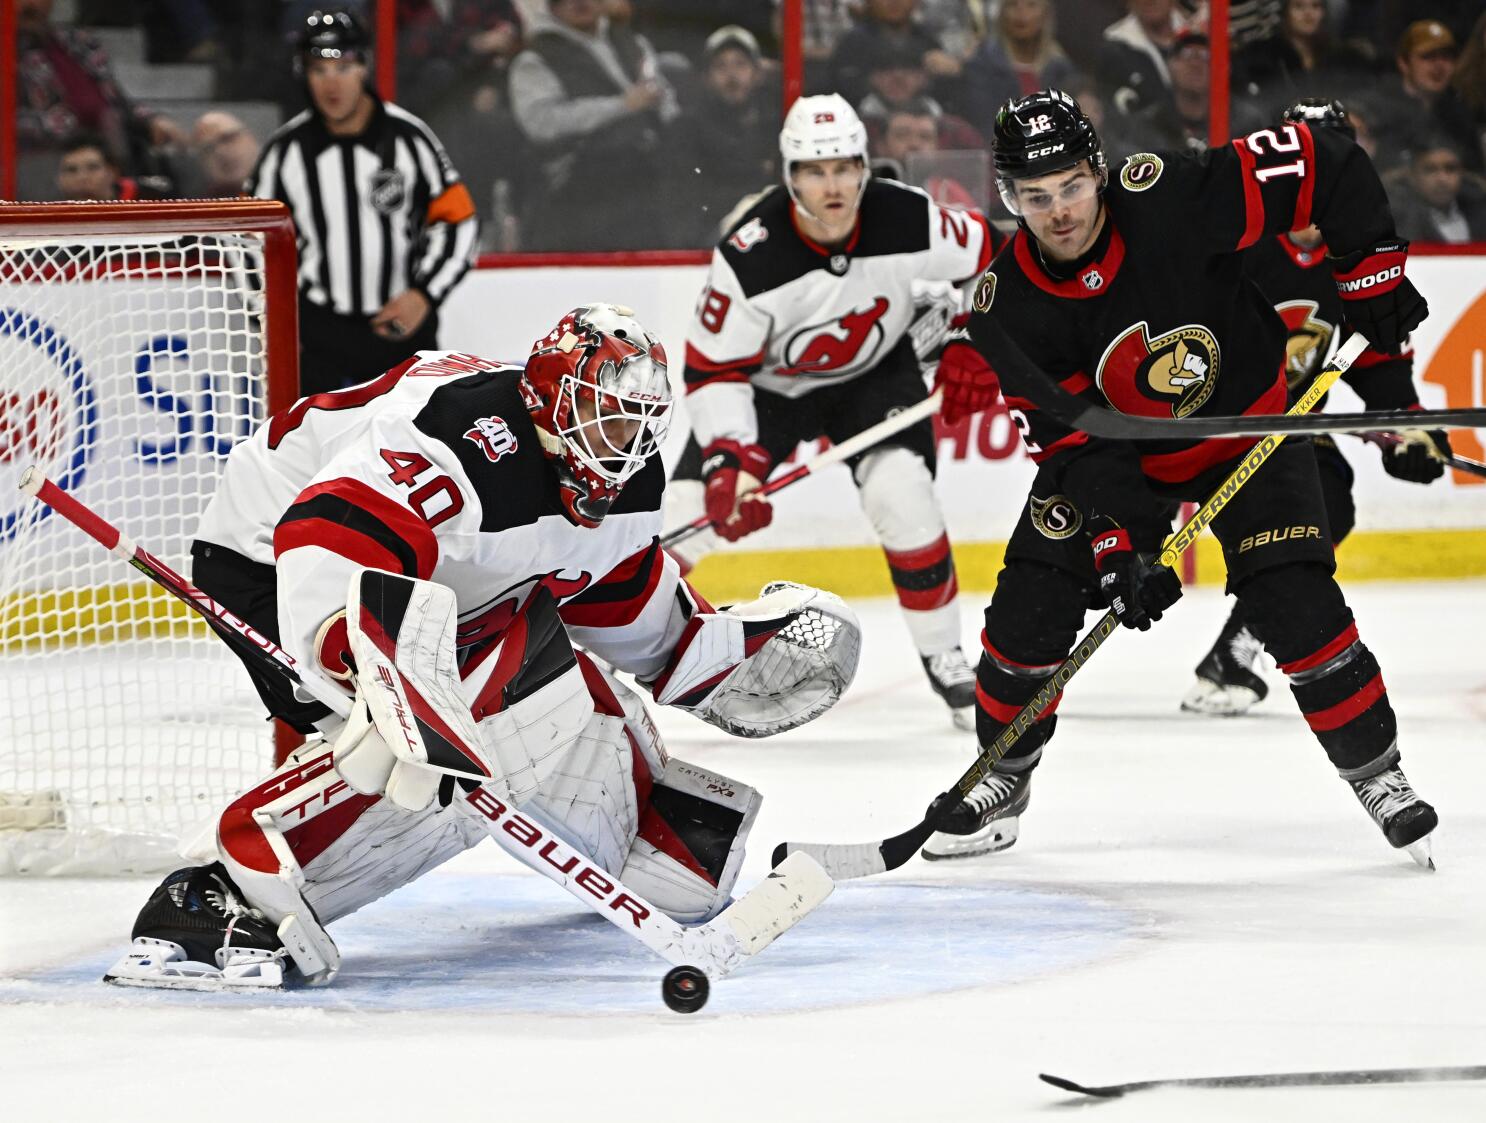 Will New Jersey Devils Or Ottawa Senators Be Better Now And In Future?